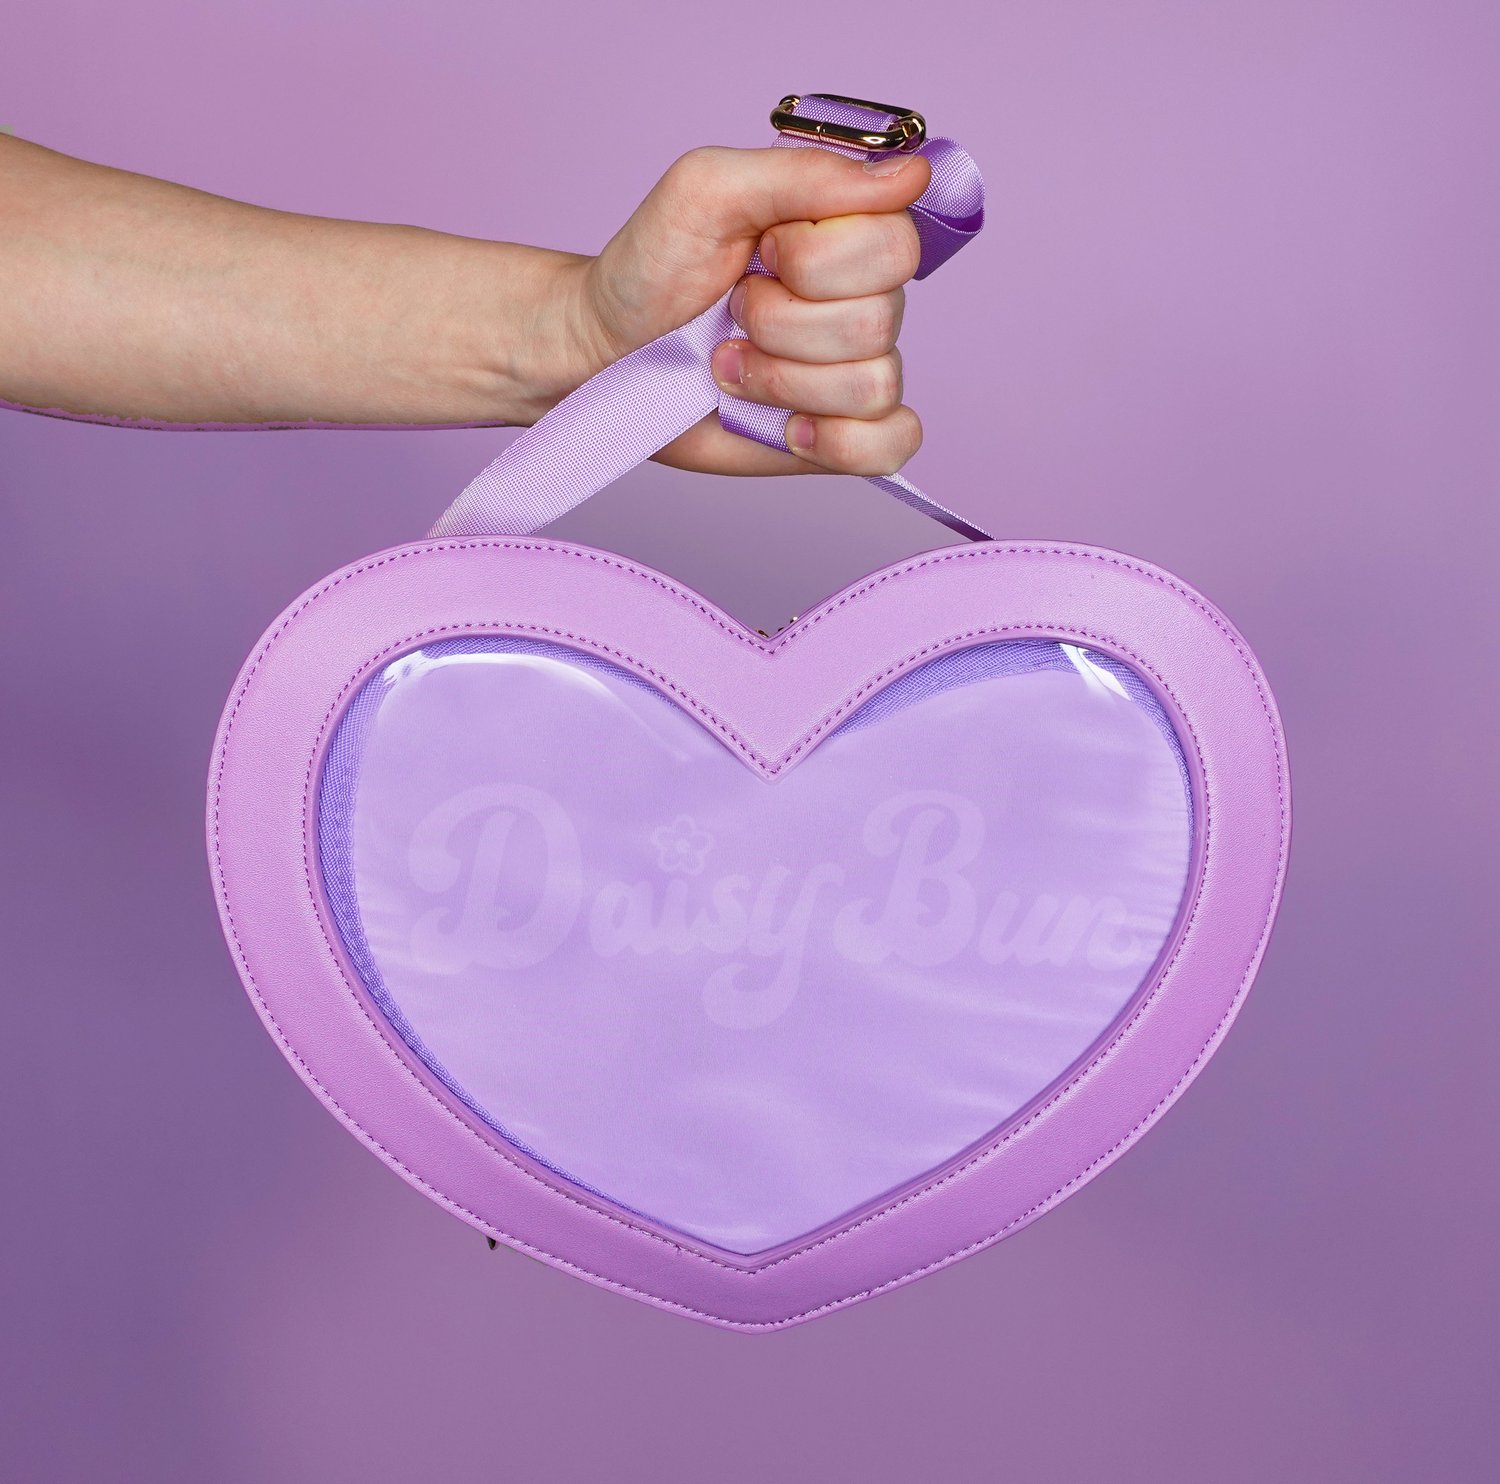 lilac or pink pastel heart bag – Titina Accessories